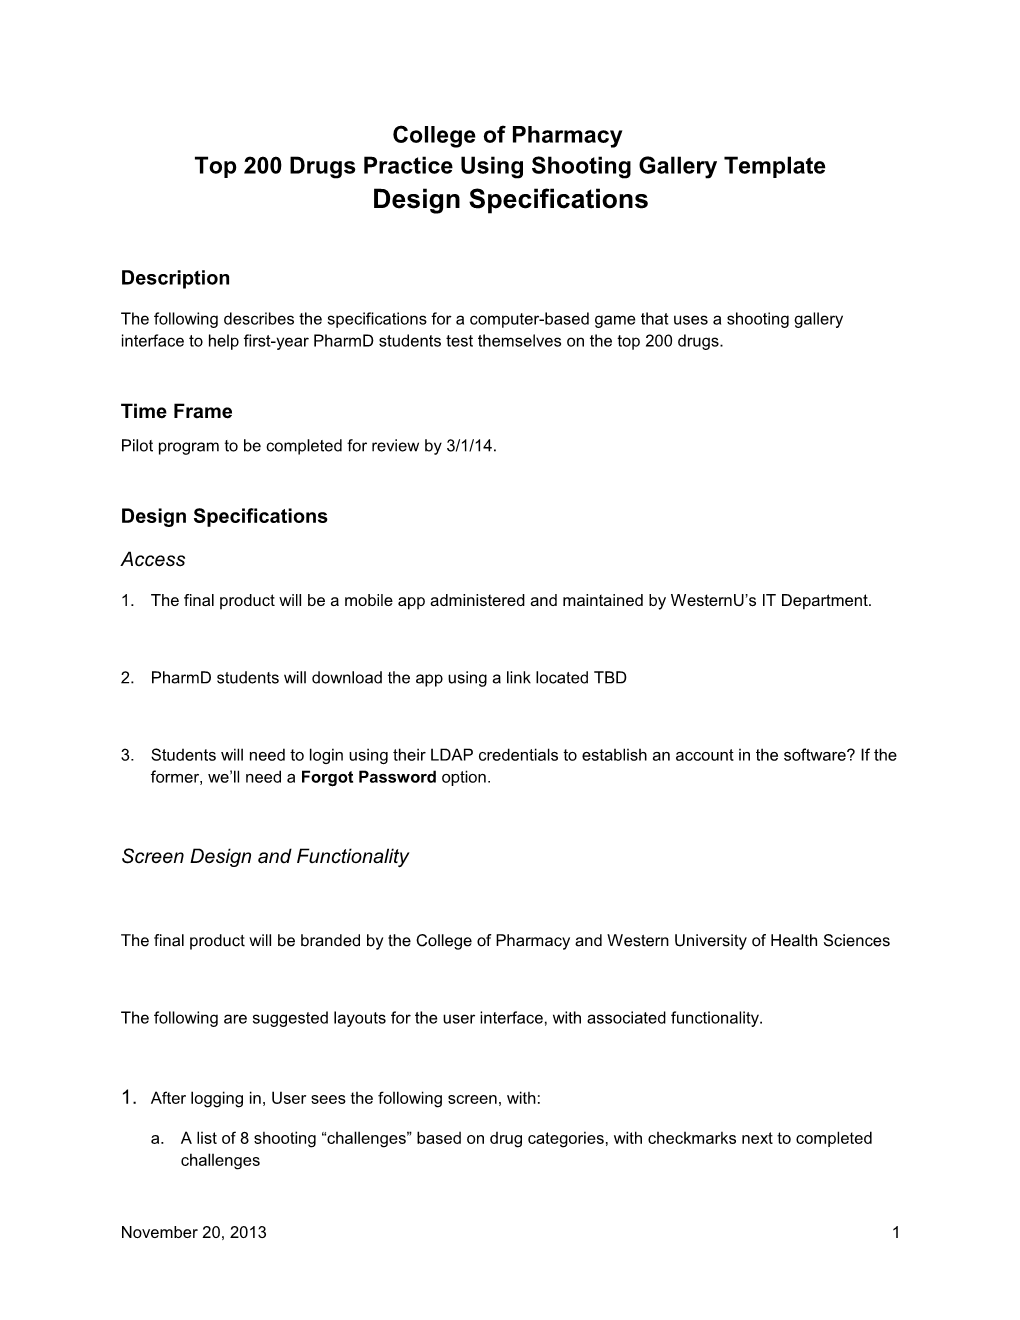 College of Pharmacy Top 200 Drugspractice Using Shooting Gallerytemplate Design Specifications